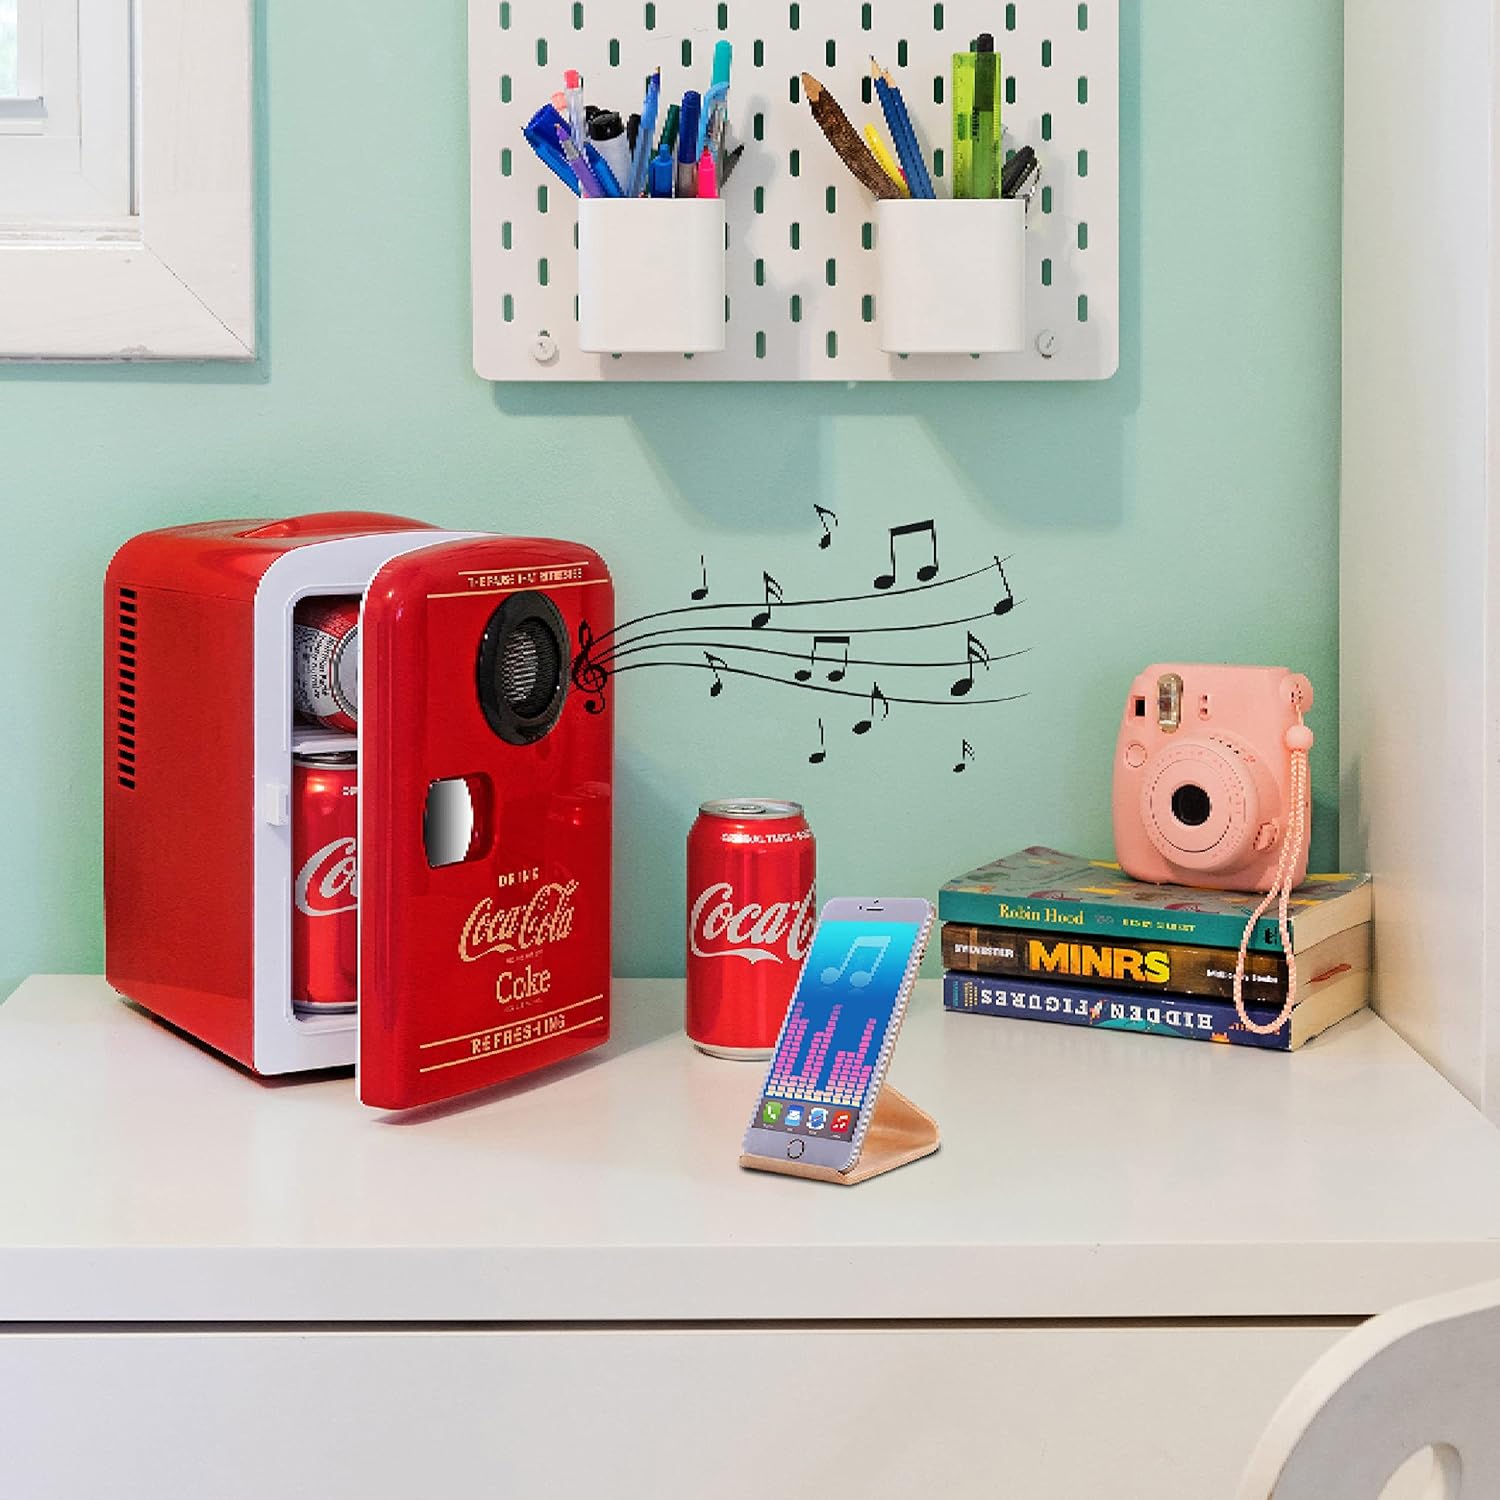 Coca Cola 4L Portable Mini Fridge Cooler/Warmer with Bluetooth Speaker, Compact Personal Refrigerator with Built-In Wireless Speaker,12V and AC Cords, Cute Desk Accessory for Home Office Dorm, Red [Energy Class A]